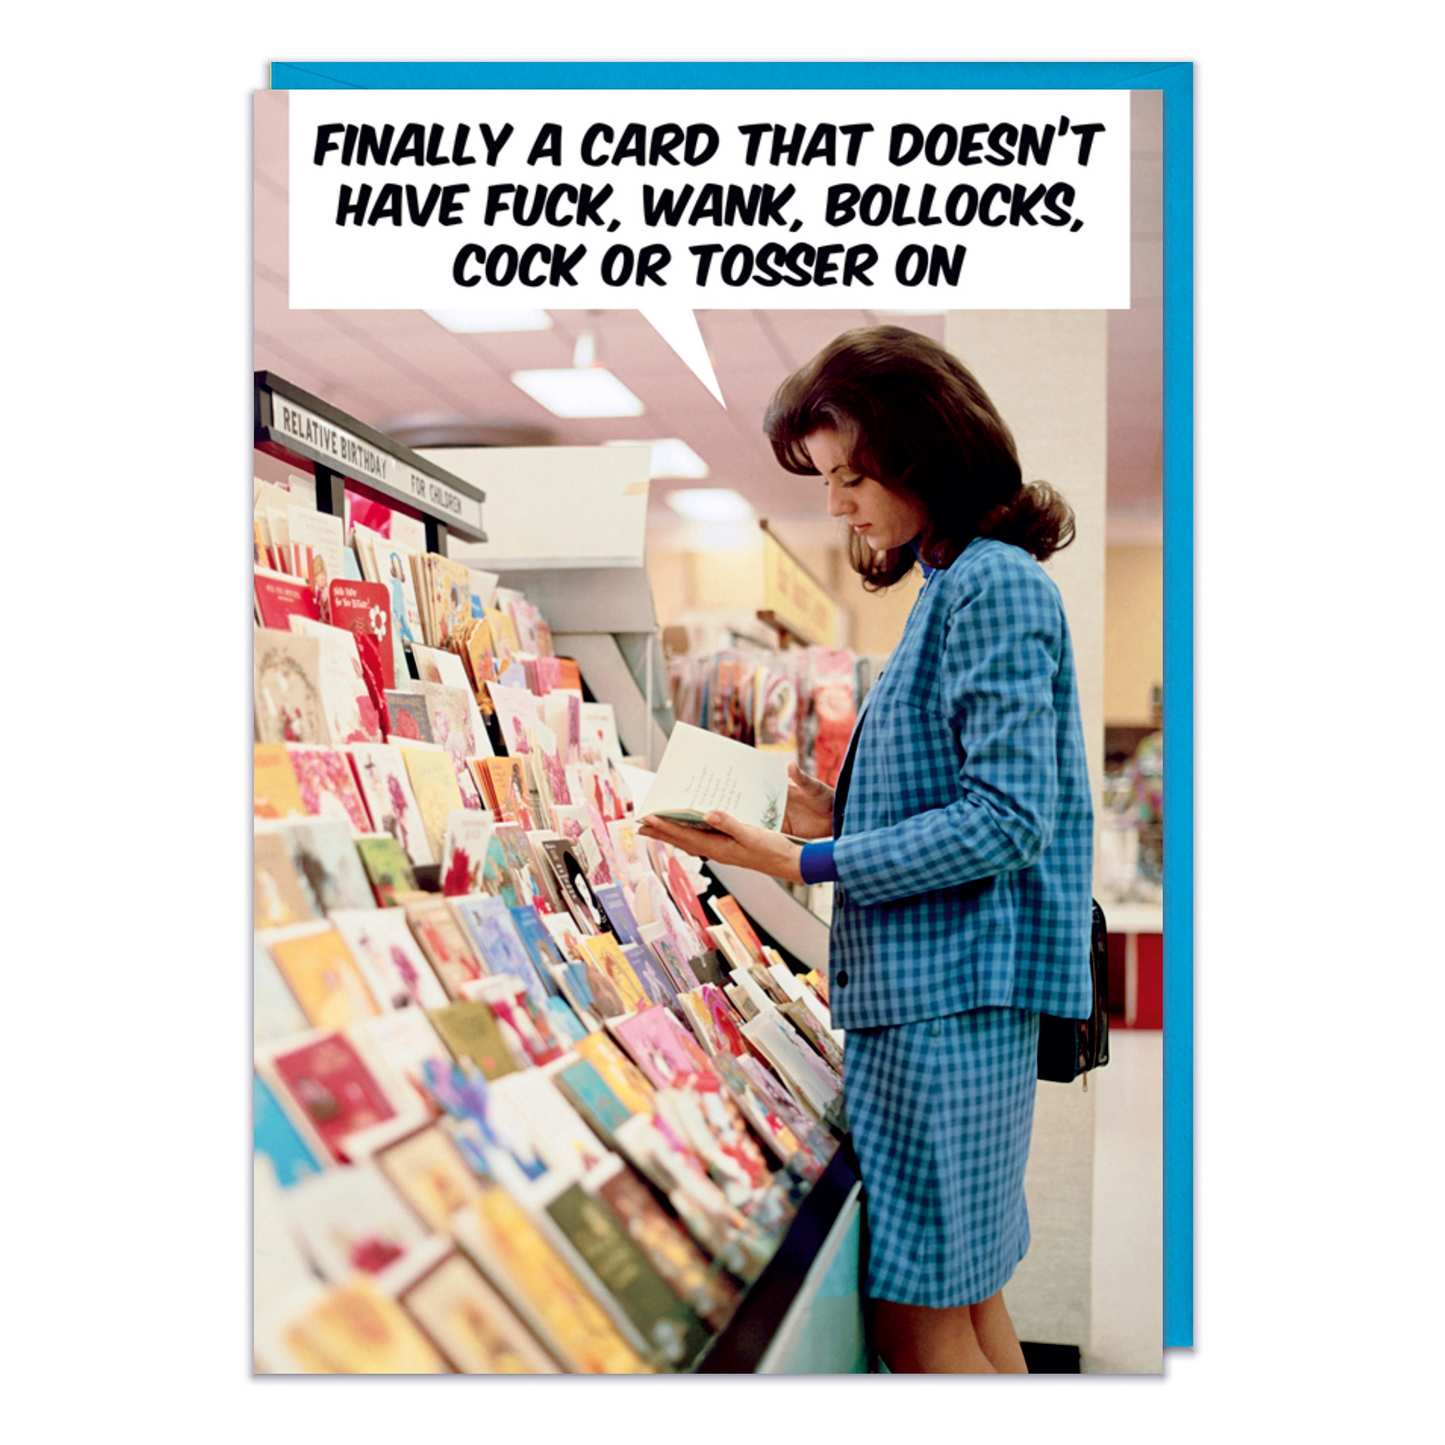 Finally A Card That Doesn't Have Fuck, Wank, Bollocks, C*ck or Tosser On - Greeting Card - Mellow Monkey